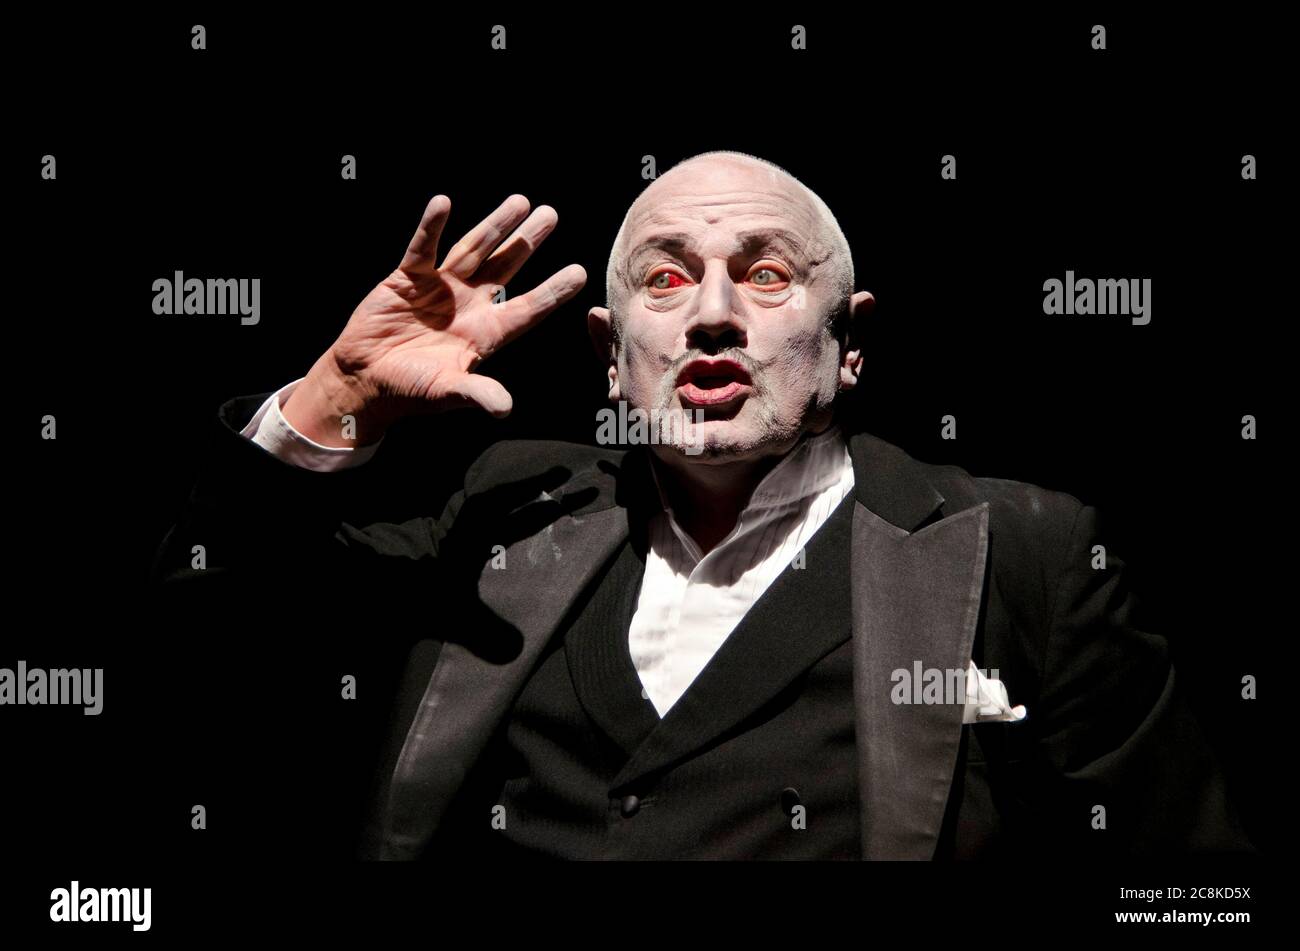 Steven Berkoff in THE TELL-TALE HEART adapted from the short story by Edgar Allen Poe  part of ONE MAN, a double bill of plays by Berkoff, at the Riverside Studios, London W6  13/04/2011 Stock Photo